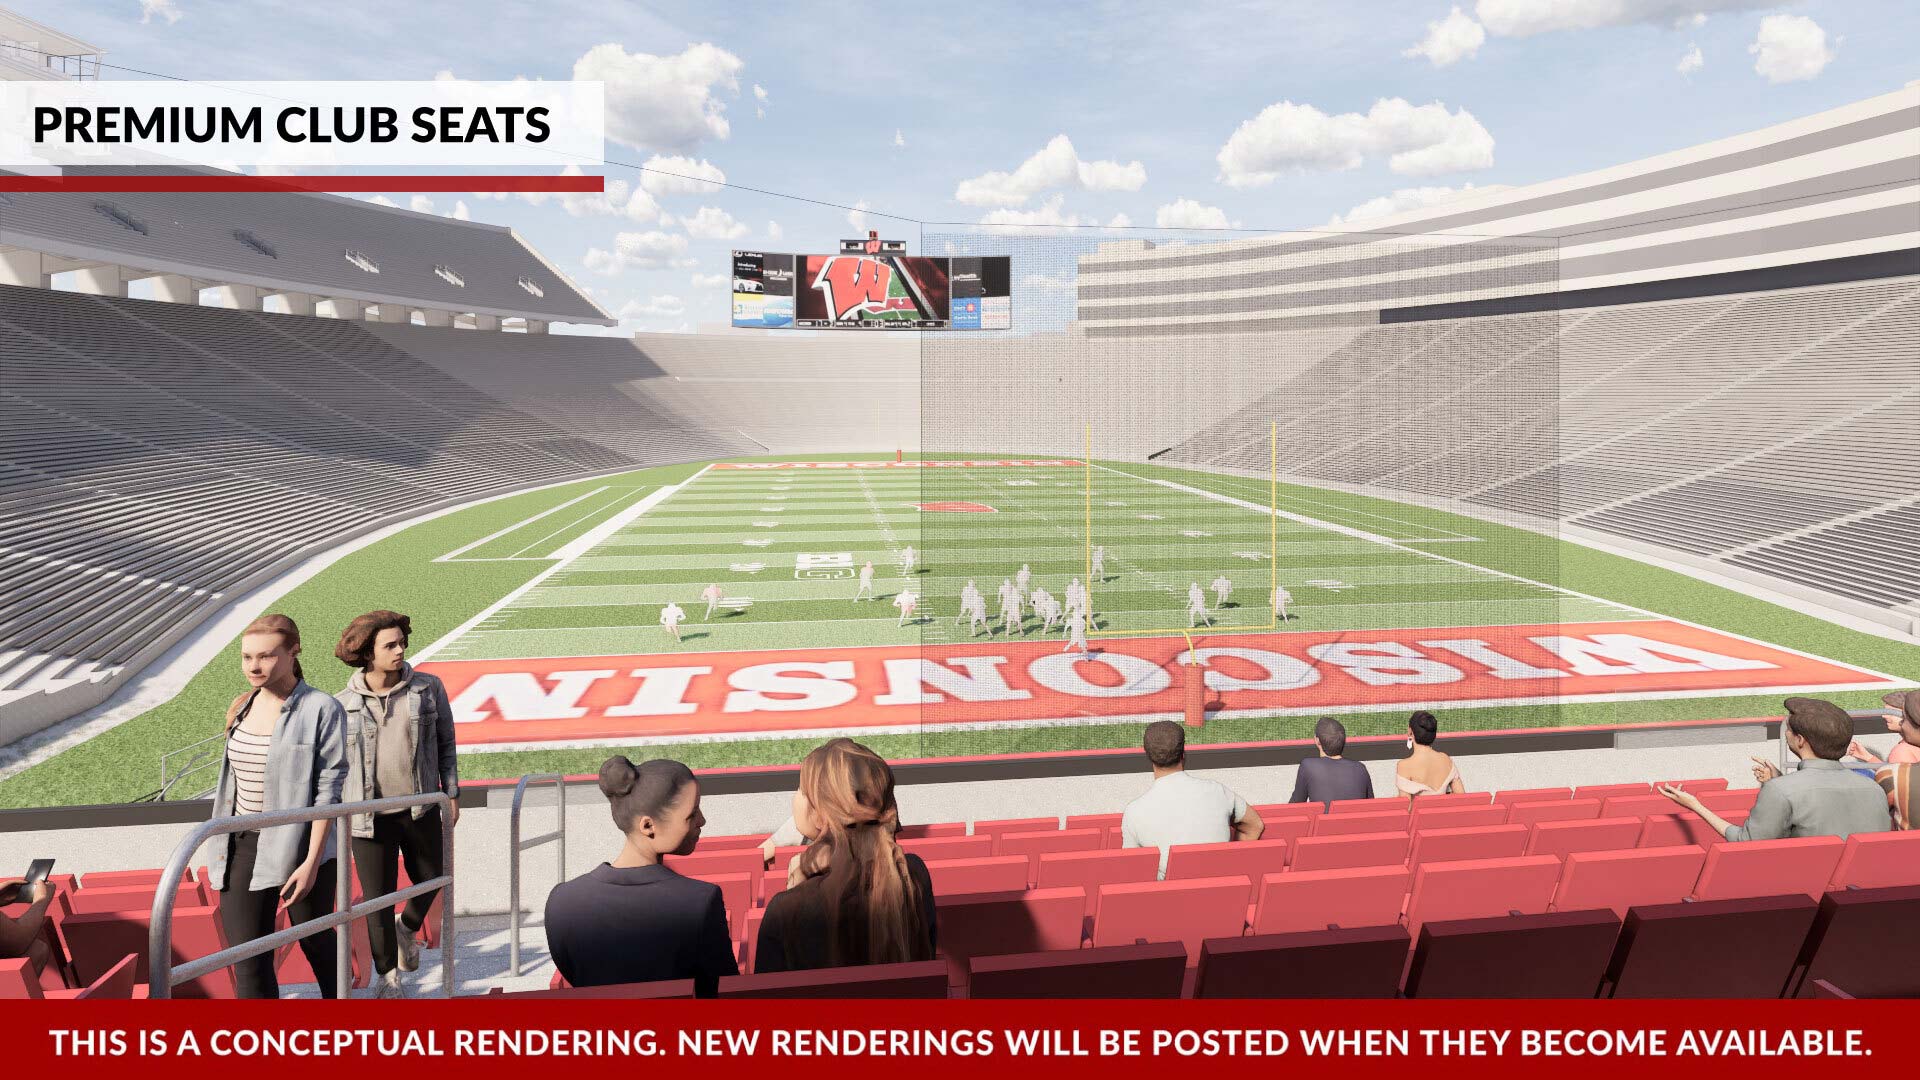 A render of a view of the field from the premium club seats.